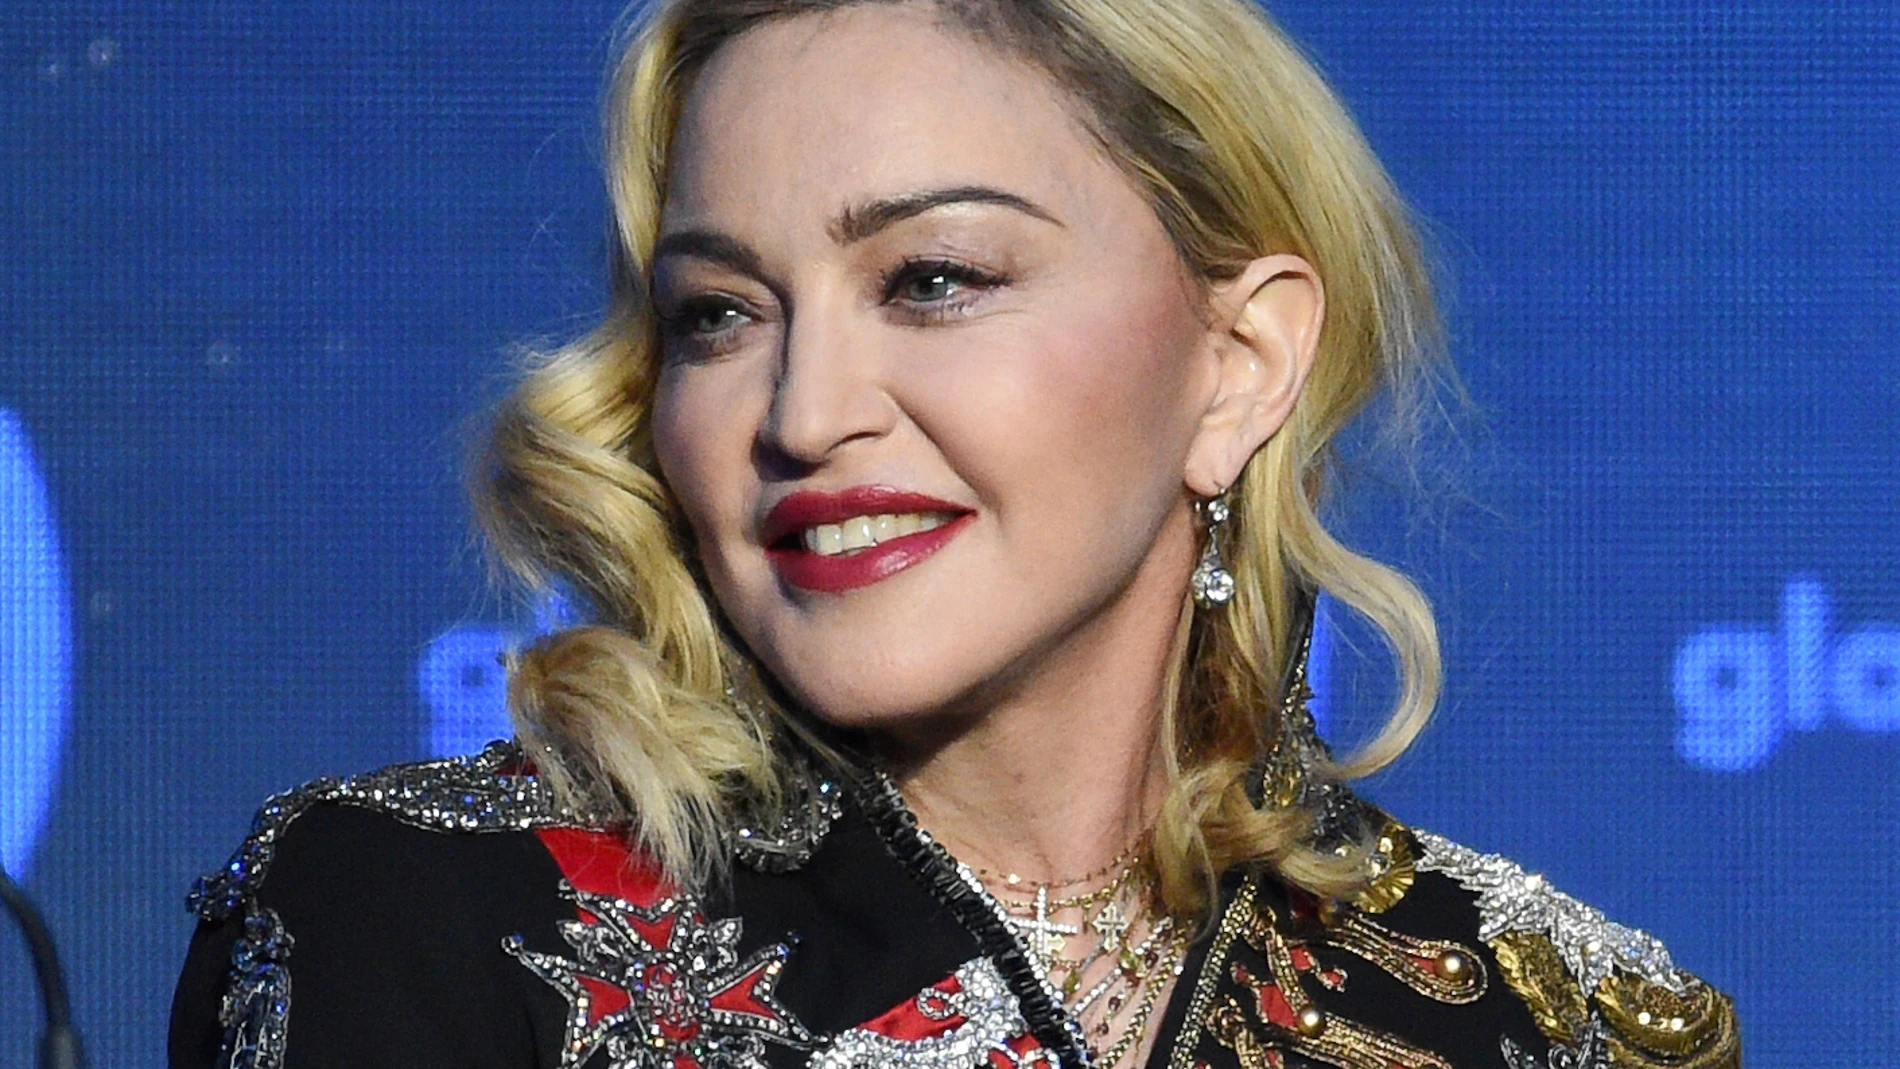 FILE - Madonna appears at the 30th annual GLAAD Media Awards in New York on May 4, 2019, in New York. Madonna has postponed her career-spanning 2023 ‘Celebration’ tour due to ‘serious bacterial infection’ and ICU stay, her manager Guy Oseary confirmed on Wednesday. The tour was set to kick-off in Vancouver on July 15. (Photo by Evan Agostini/Invision/AP, File)